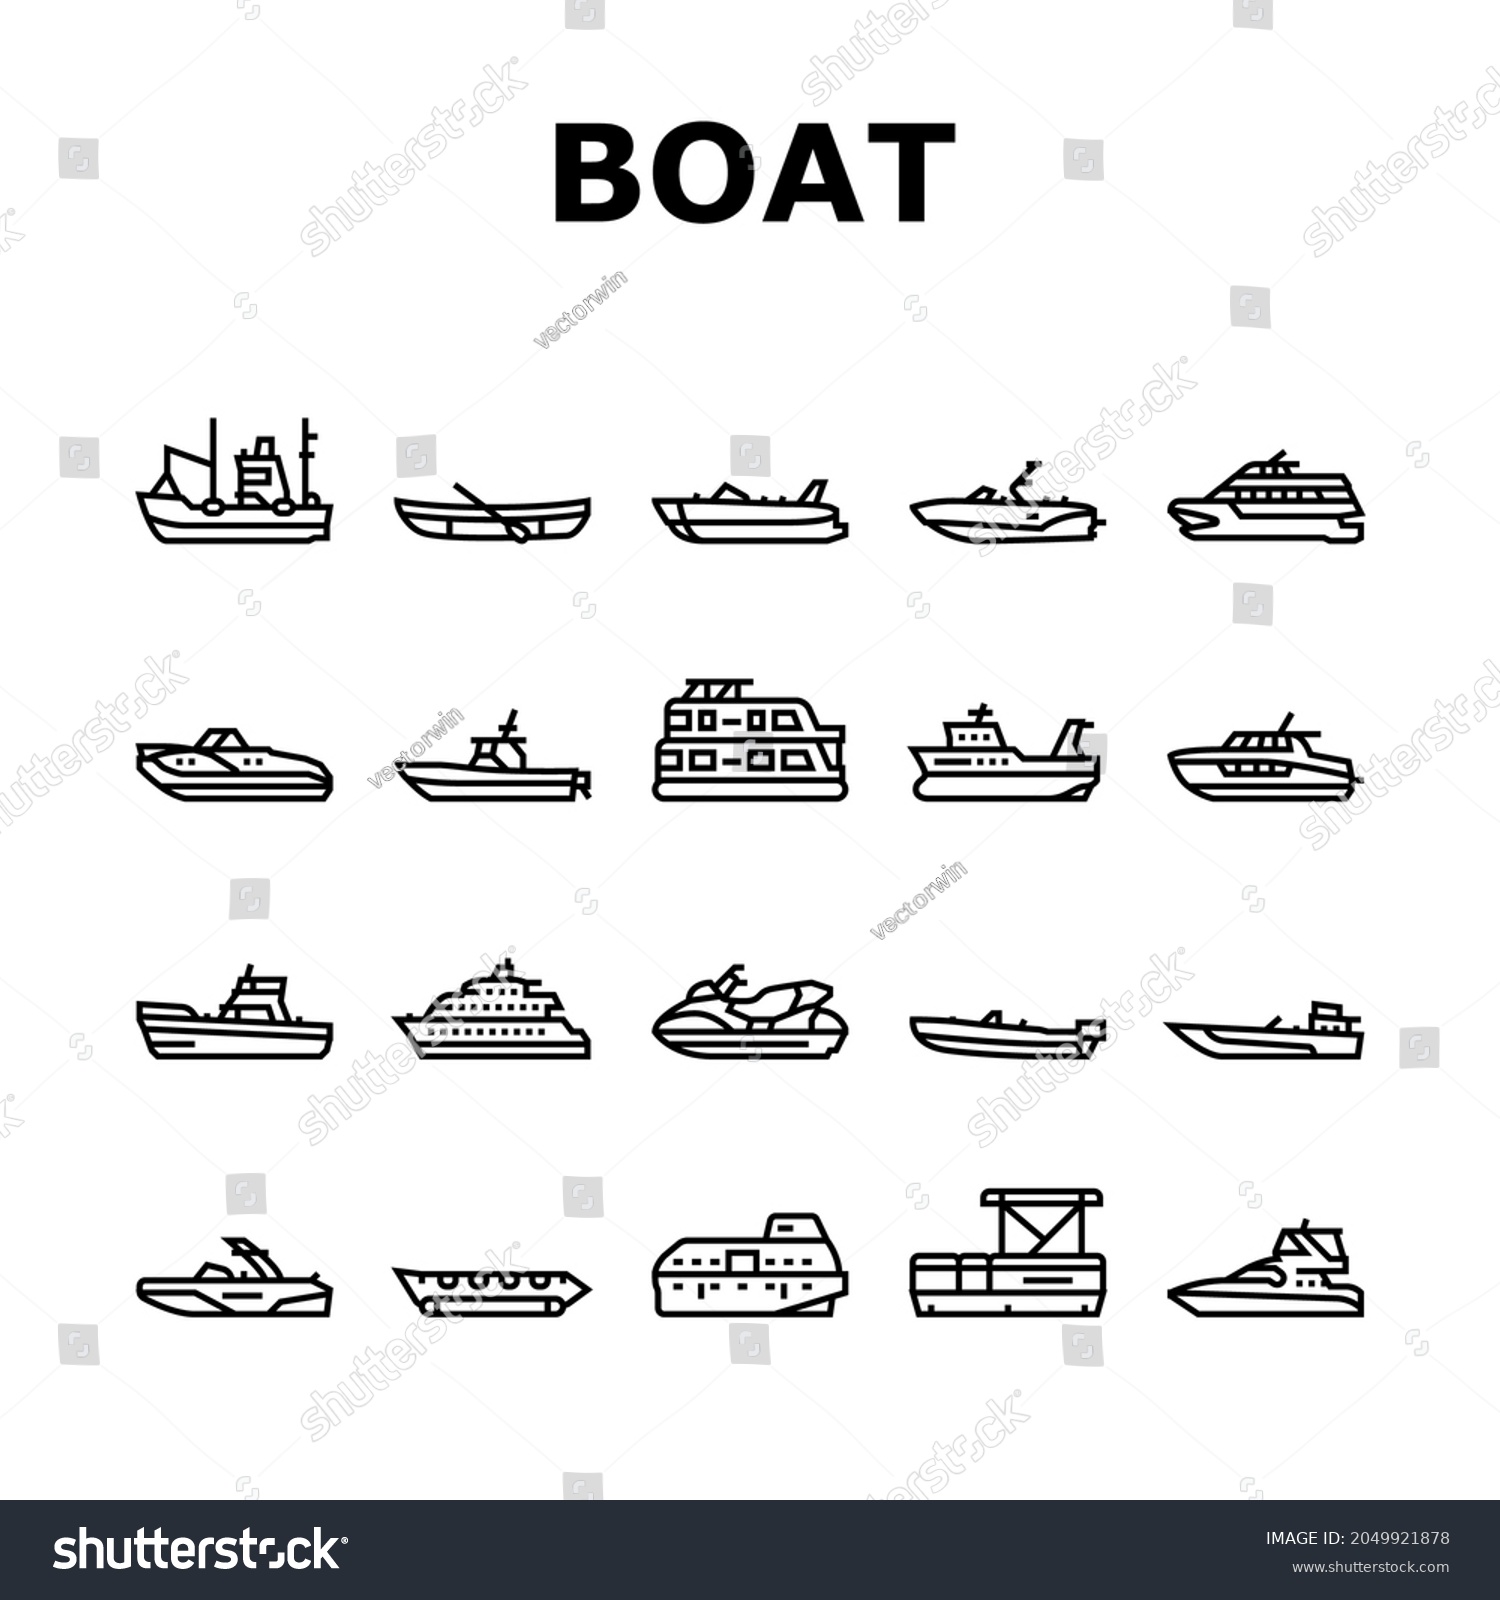 SVG of Boat Water Transportation Types Icons Set Vector. Runabout And Catamaran, Fishing And Bowrider, Motor Yacht And Cabin Cruiser Boat Line. Ship And Motorboat Transport Black Contour Illustrations svg